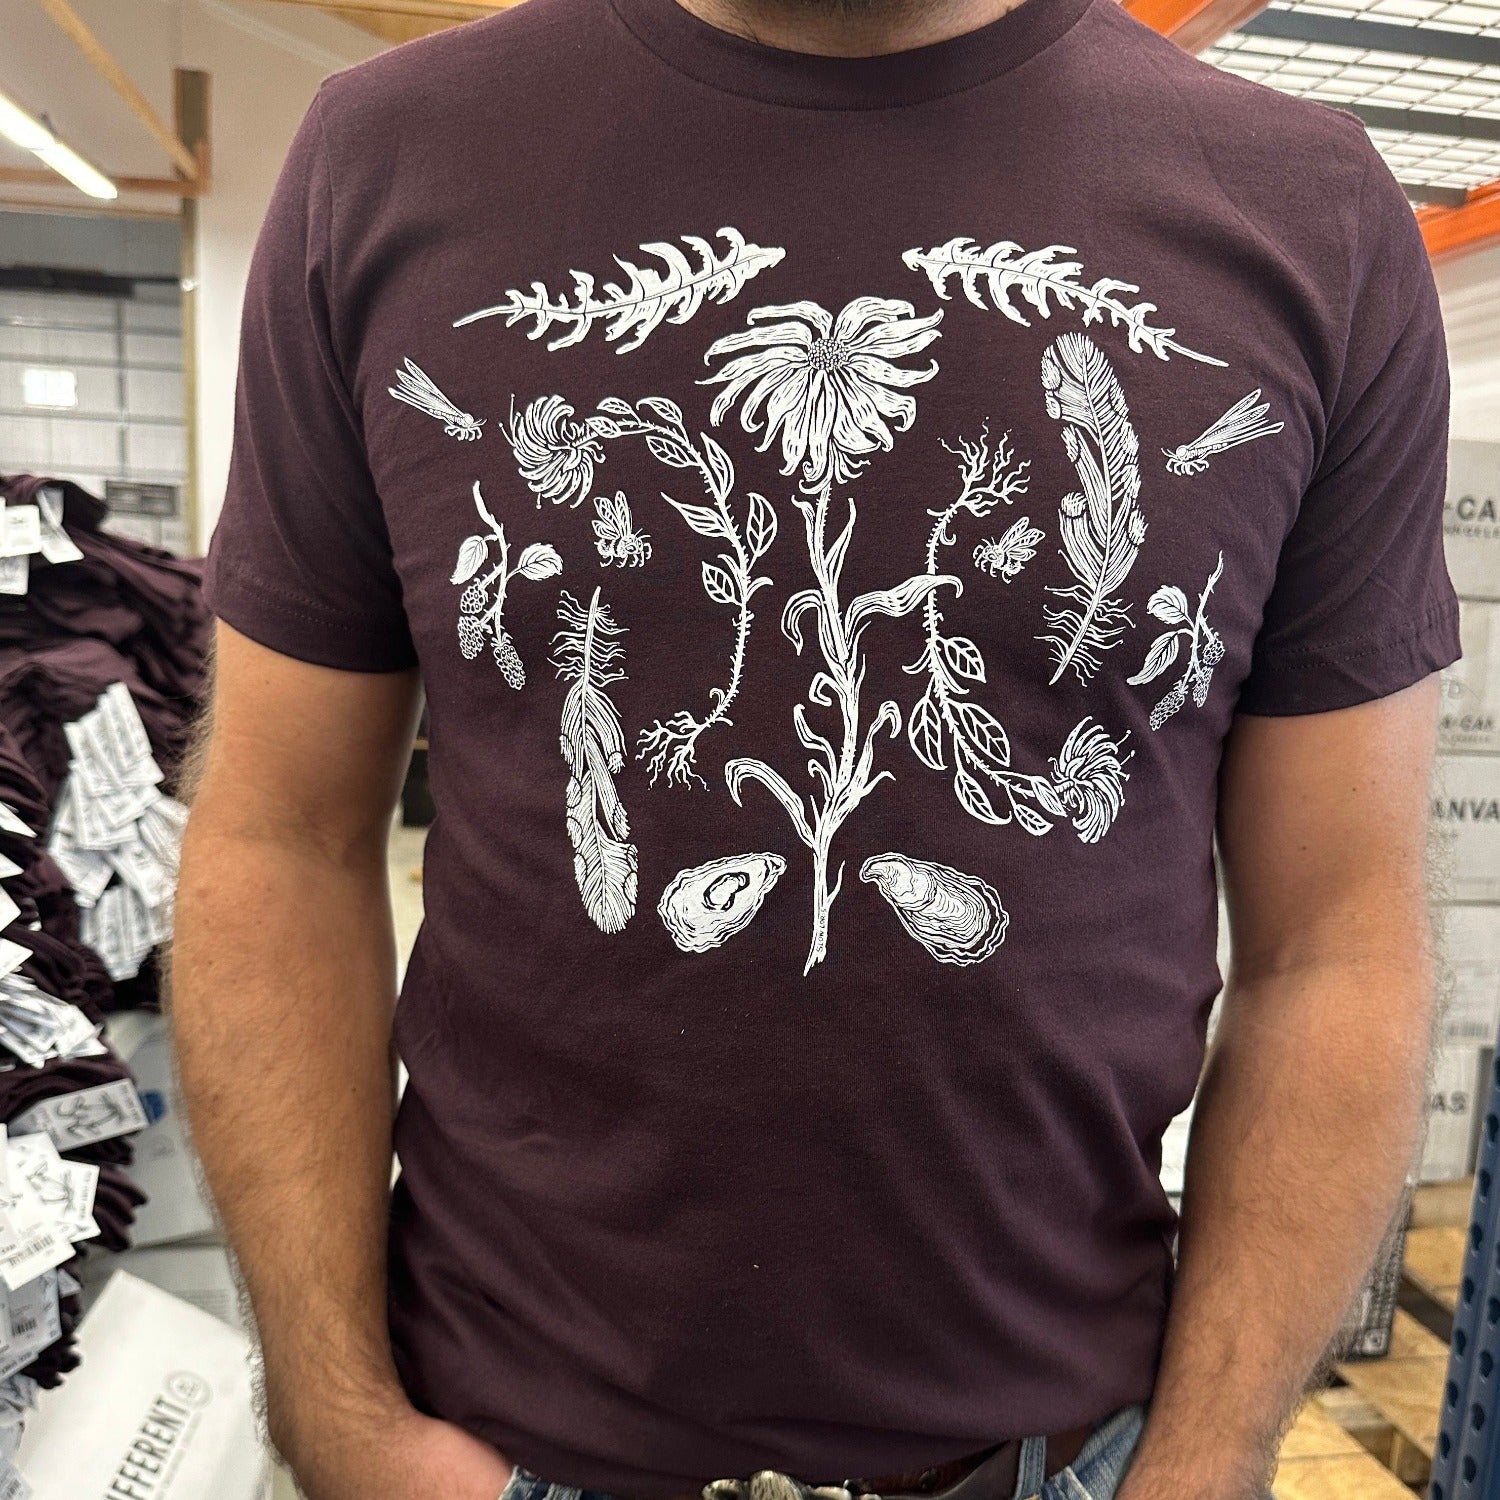 close up of a oxblood colored t-shirt with white ink of flowers, ferns, feathers, shells, etc